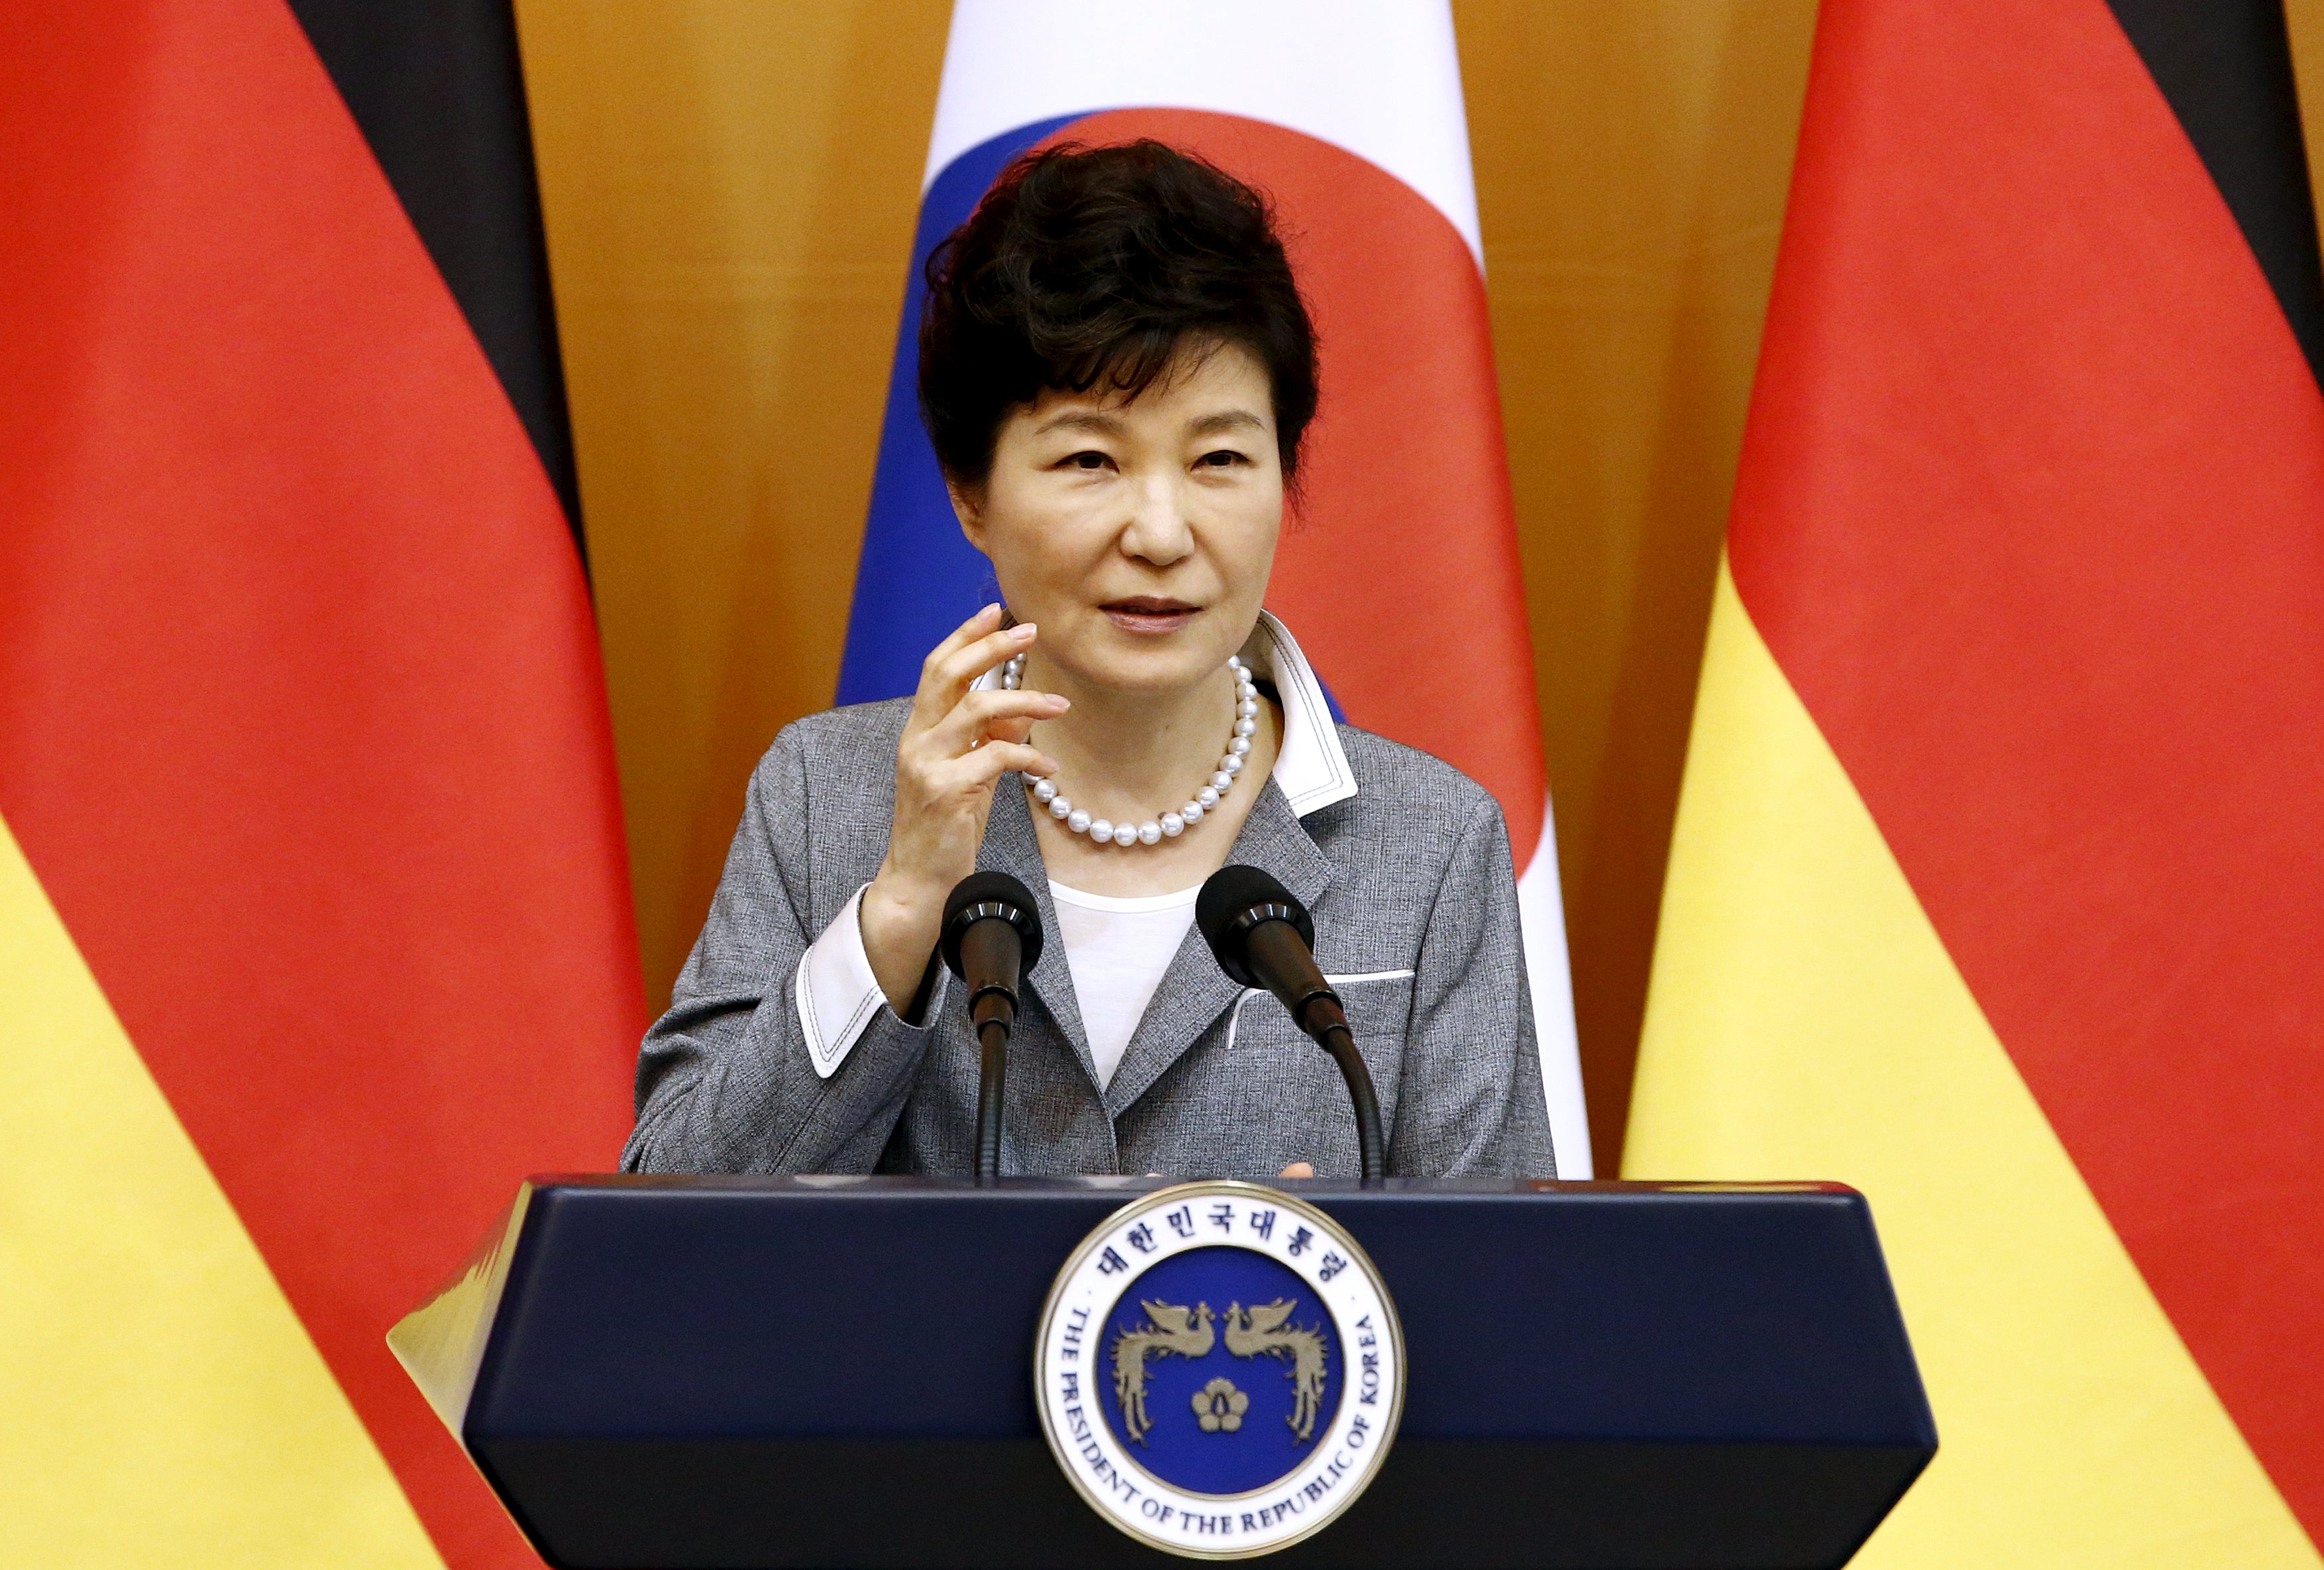 South Korean President Park Geun-Hye speaks during a joint news conference with German President Joachim Gauck (unseen) after their meeting at the presidential house in Seoul, South Korea October 12, 2015. REUTERS/Jeon Heon-Kyun/Pool